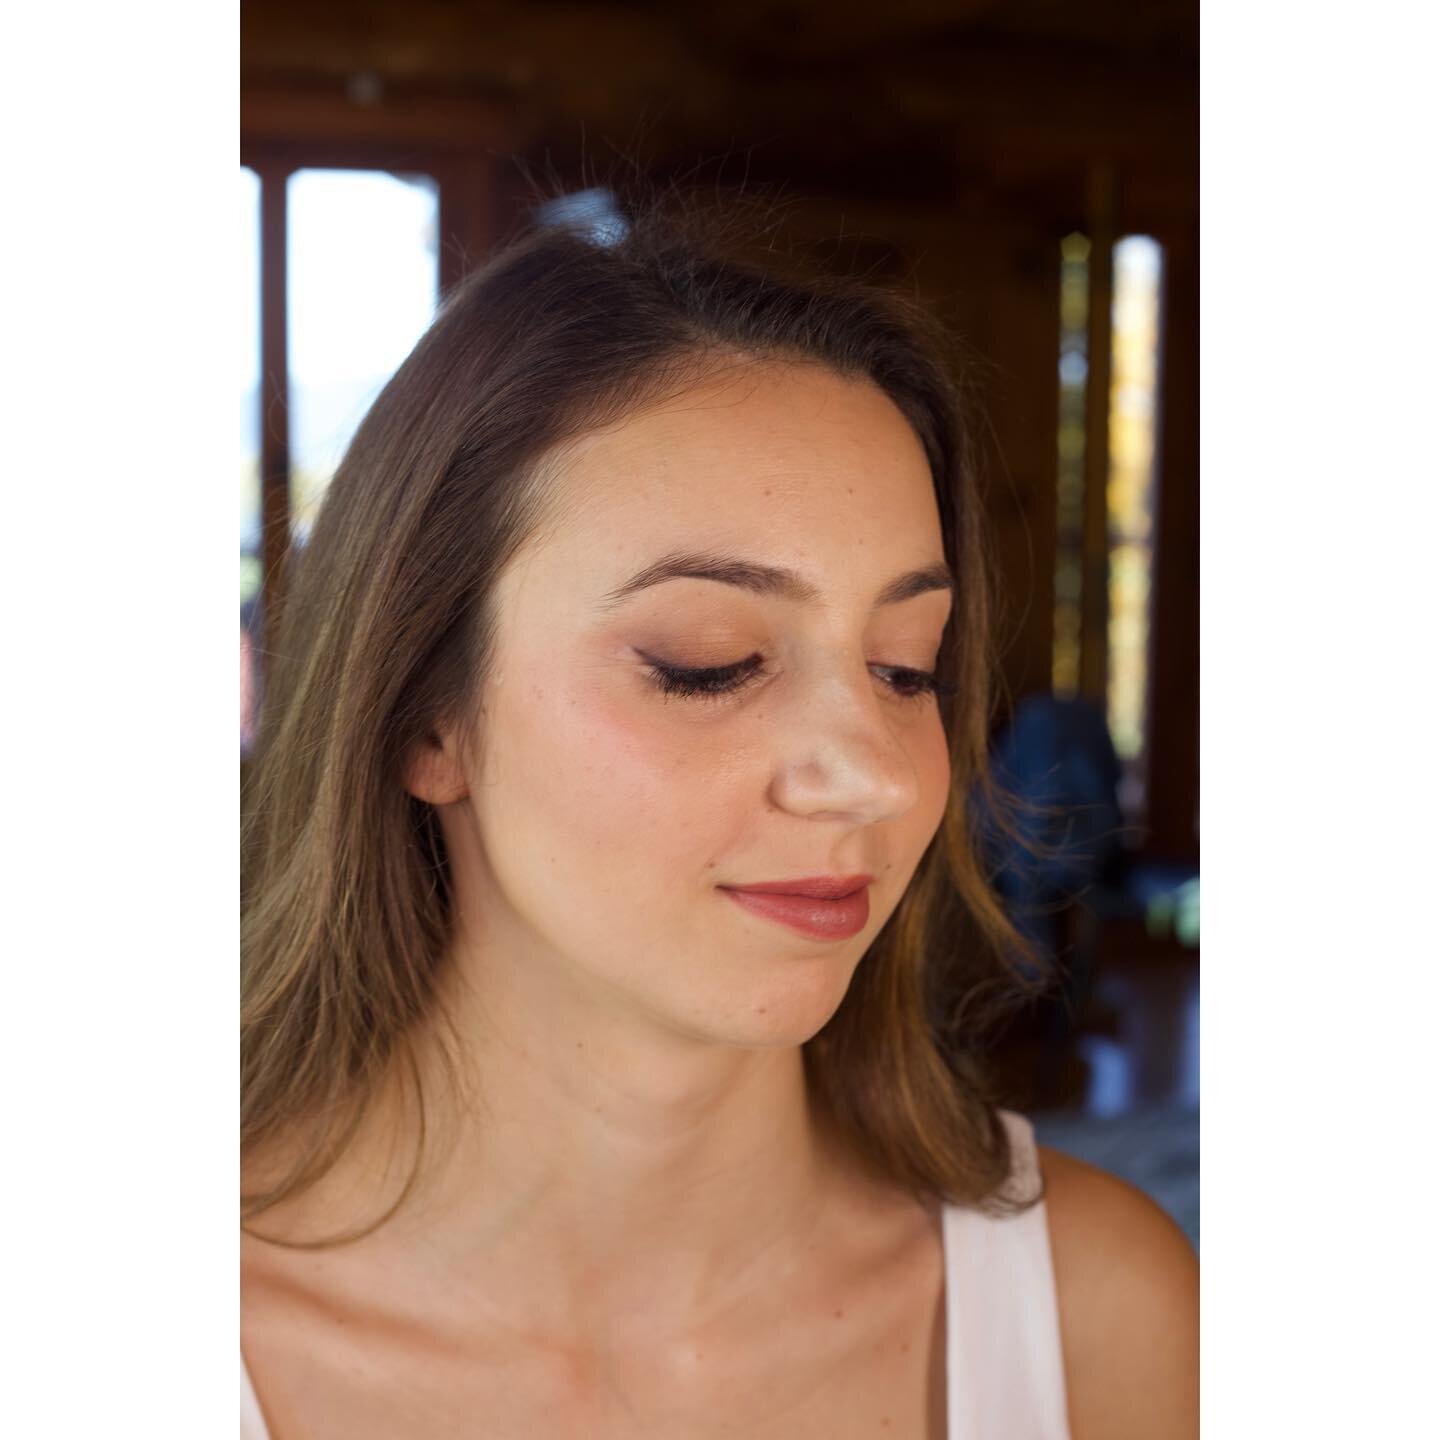 ✨🍂 Gorgeous classic matte warm brown eyeshadow with delicate winged liner and vibrant fall lip color.  Loved working with Courtney for her engagement shoot and am so looking forward to next Octobers wedding day hair &amp; makeup collab! ✨🍂

&hellip